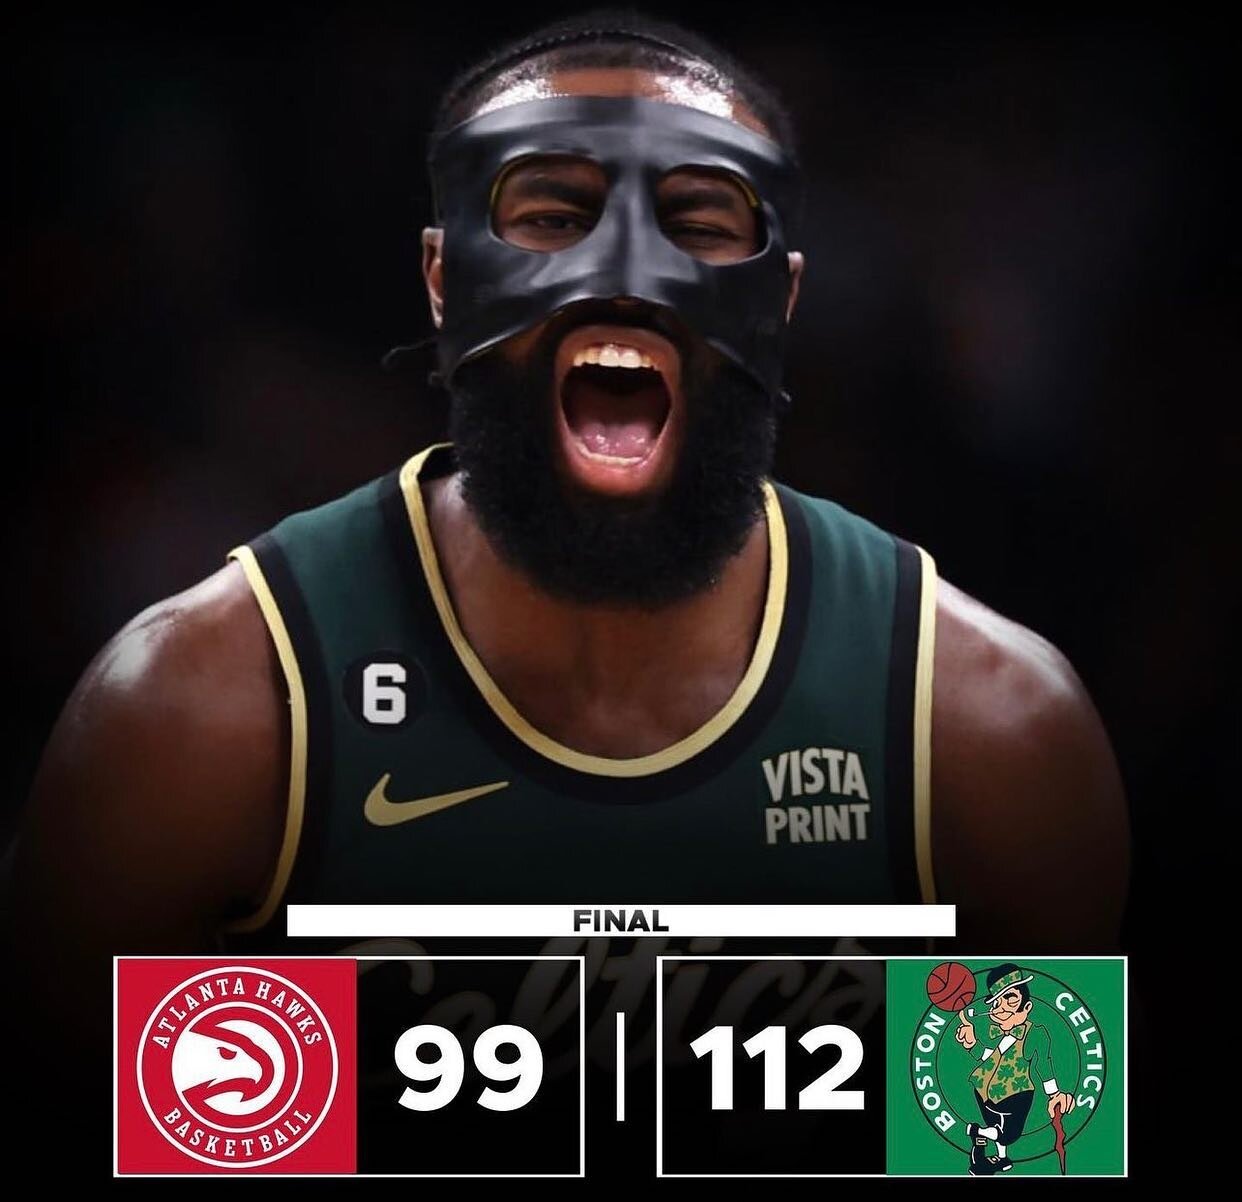 The Boston Celtics DESTROYED the Hawks today in Game 1 of the first round of the NBA Playoffs making Hounds in the Hub that much more proud of being nominated to be their &ldquo;Small Business of the Game&rdquo; back in 2021!!! We bleed green here at